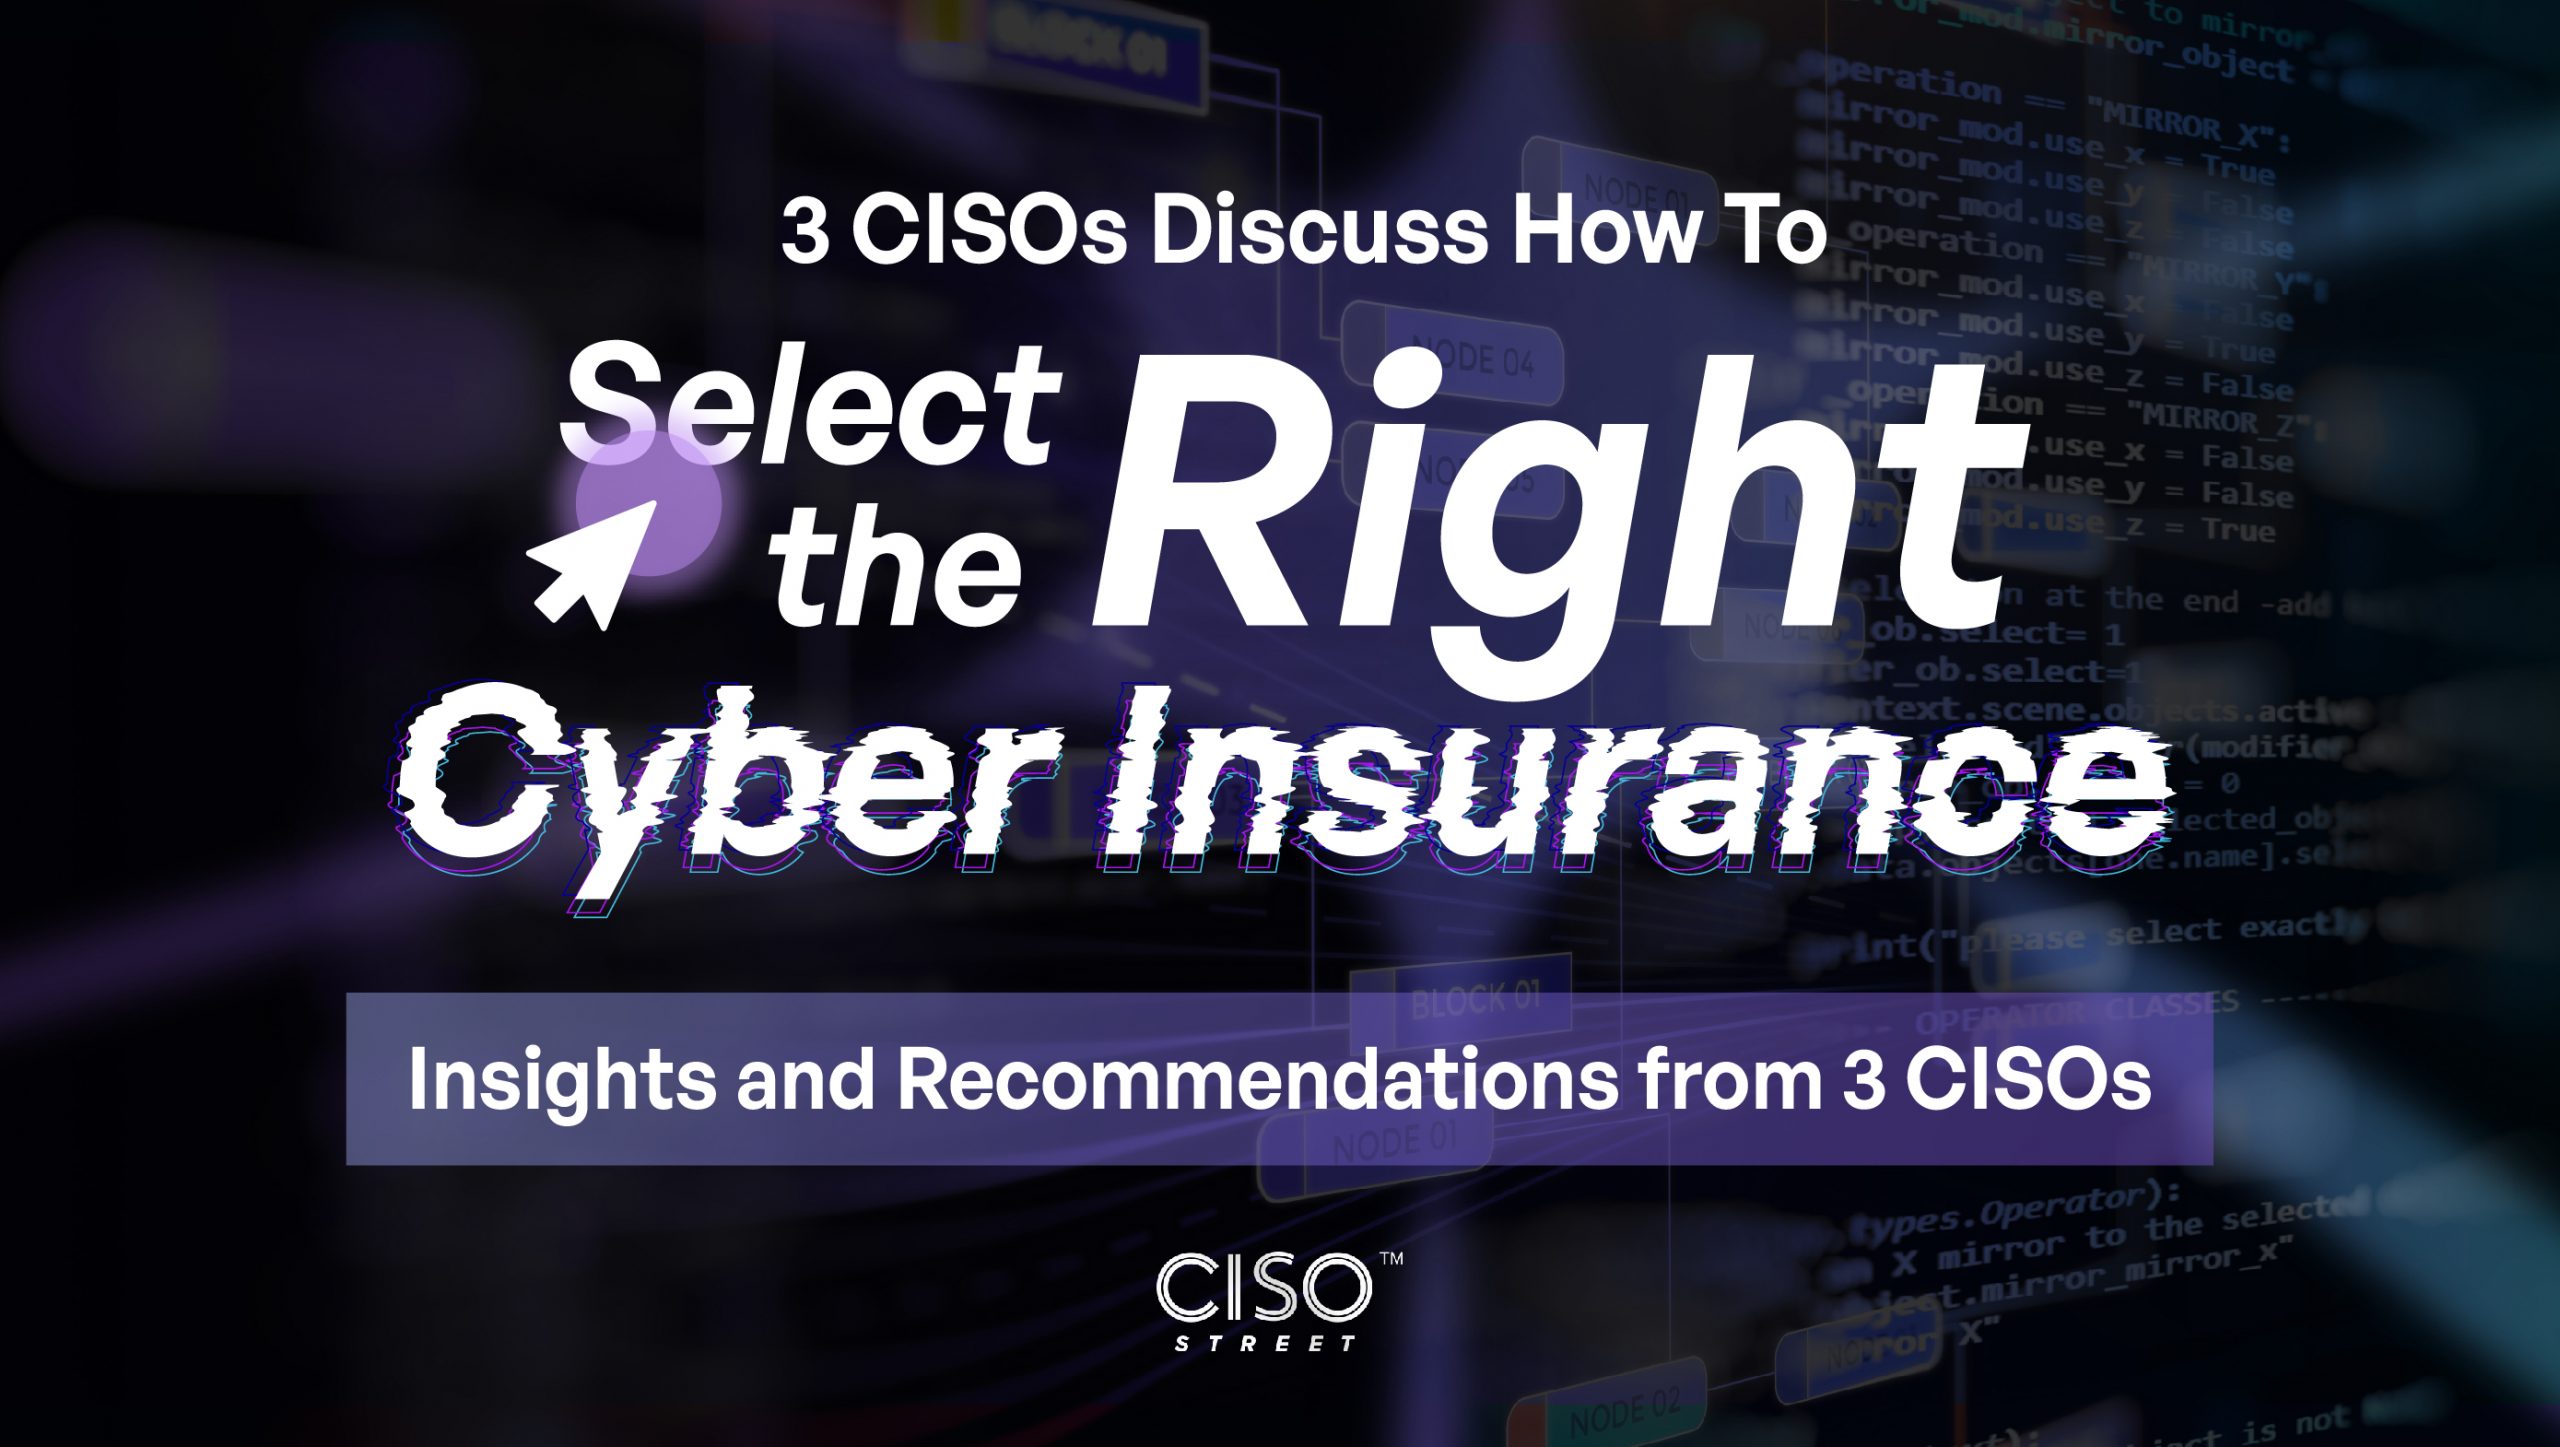 3 CISOs Discuss How To Select the Right Cyber Insurance